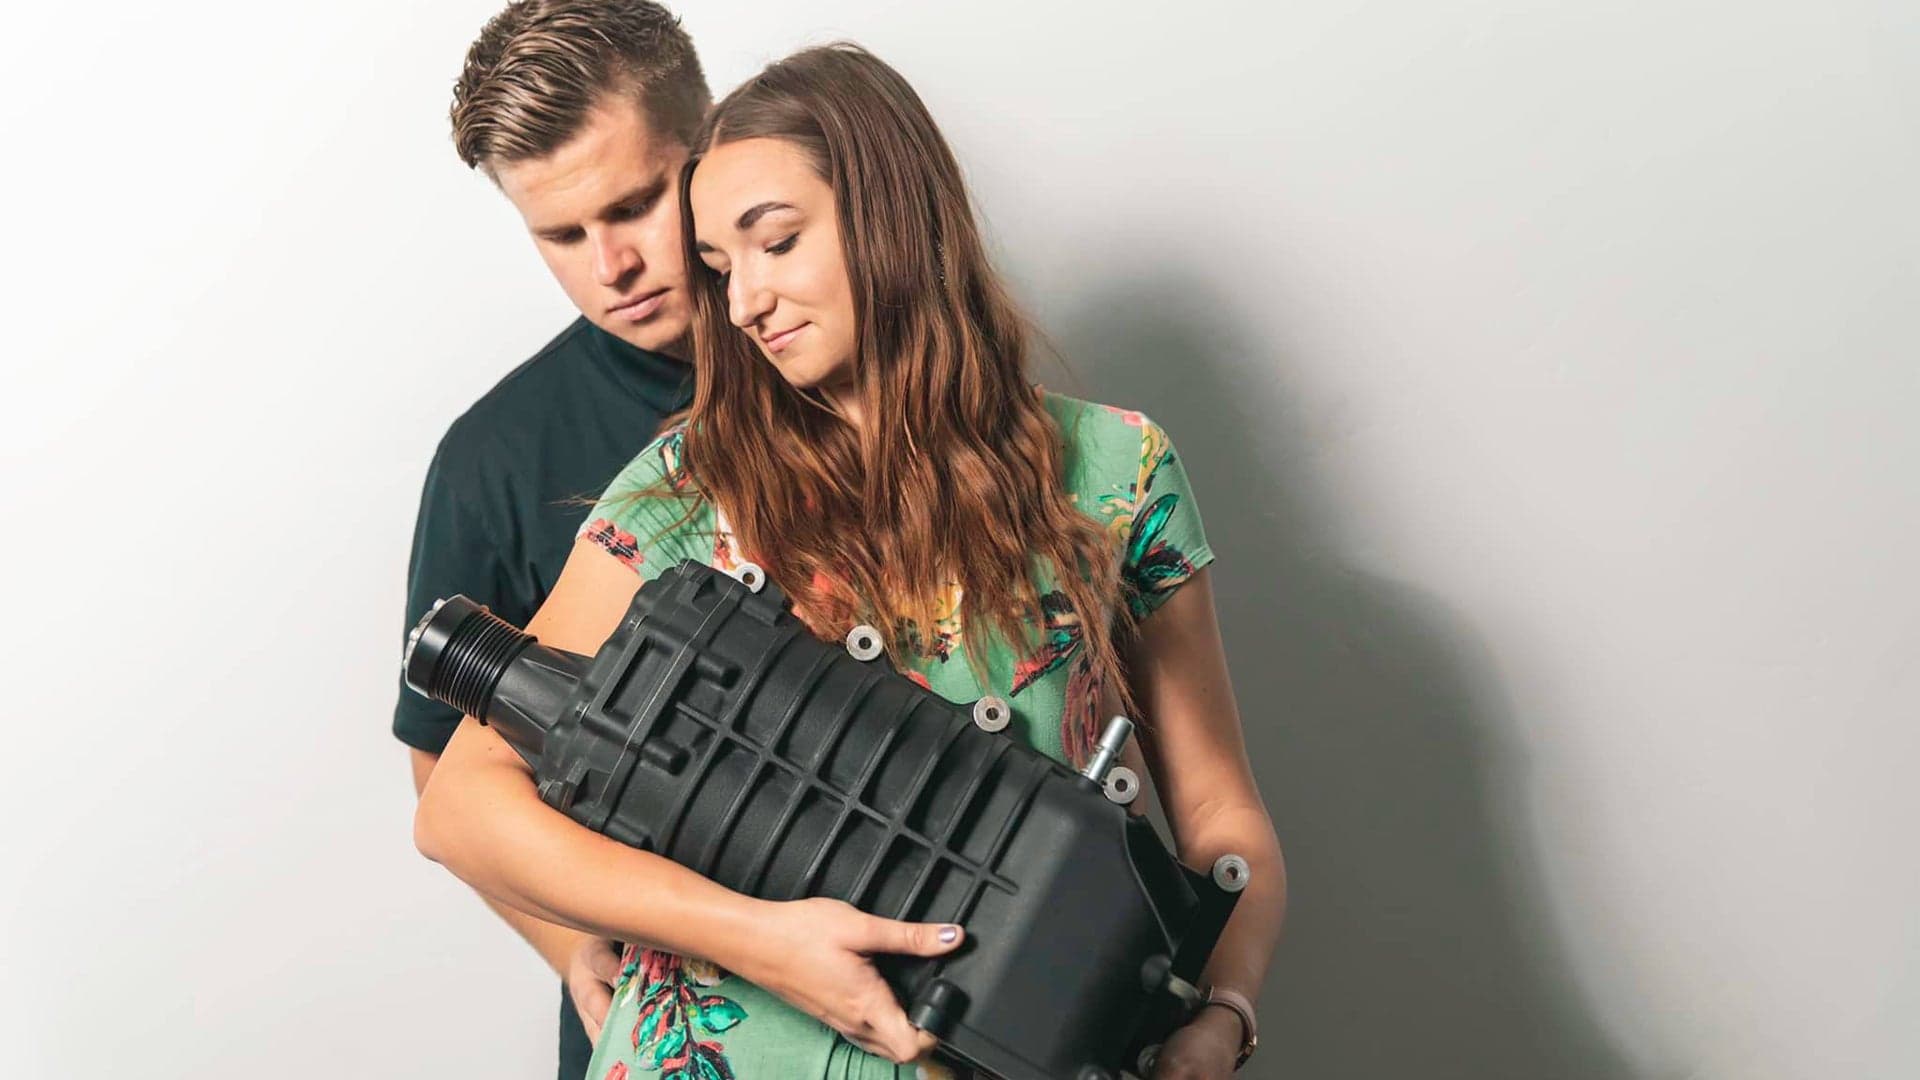 Couple Pranks Parents Everywhere by Taking Cliche Newborn Photos With Their Supercharger, Baby Eaton